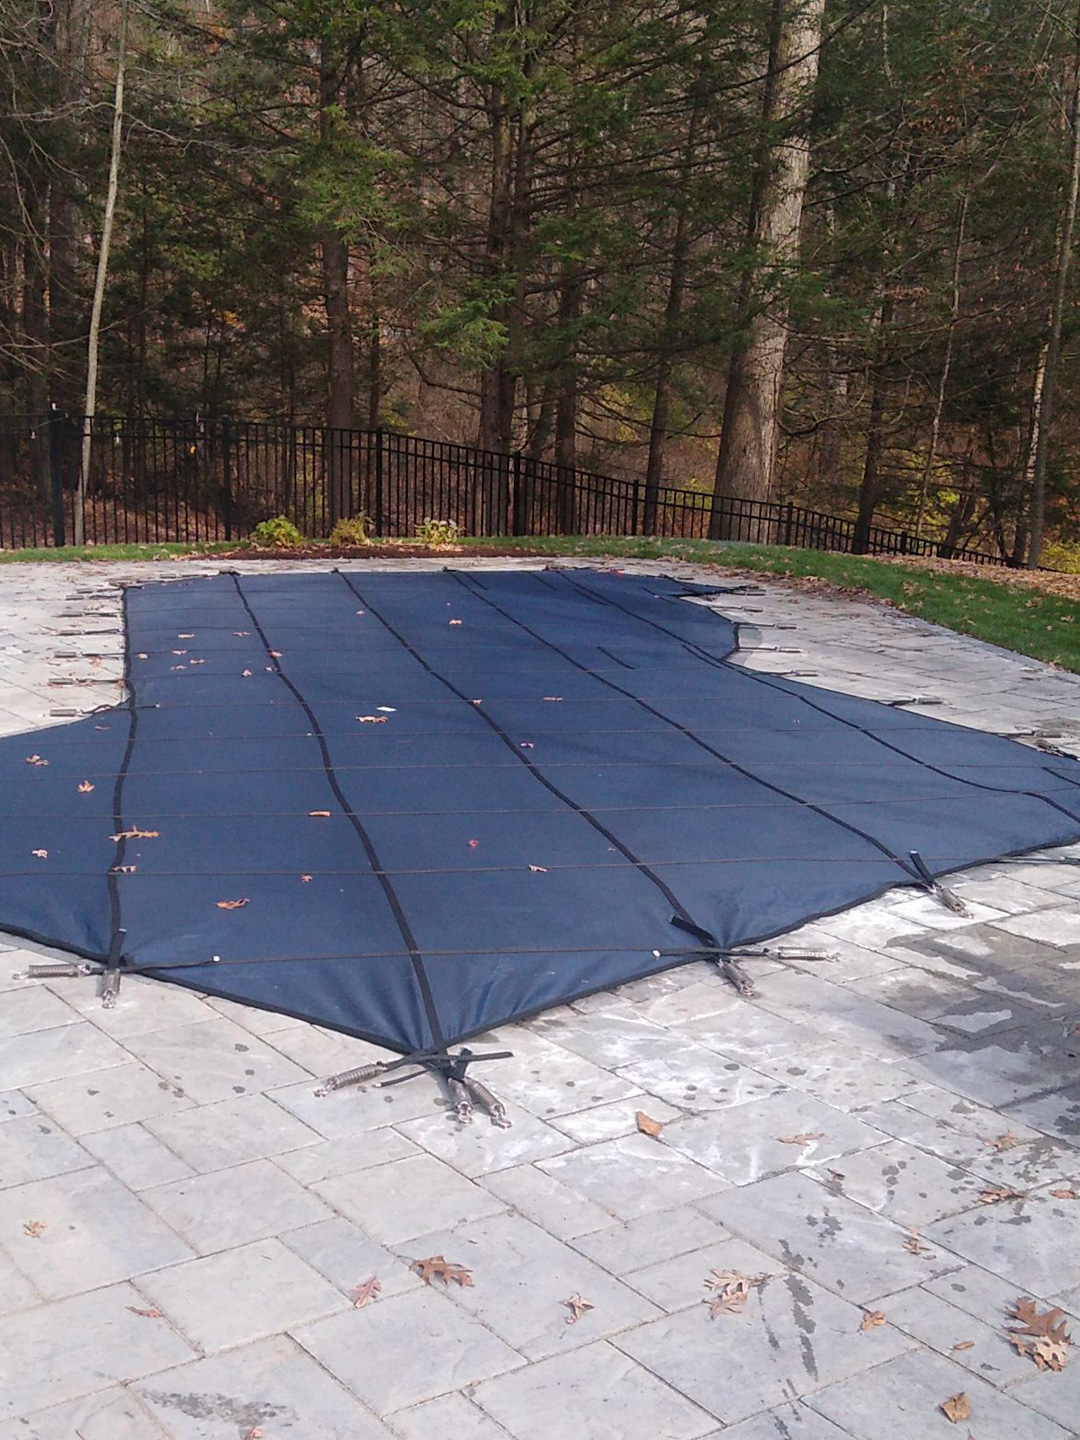 Pool covered and ready for winter